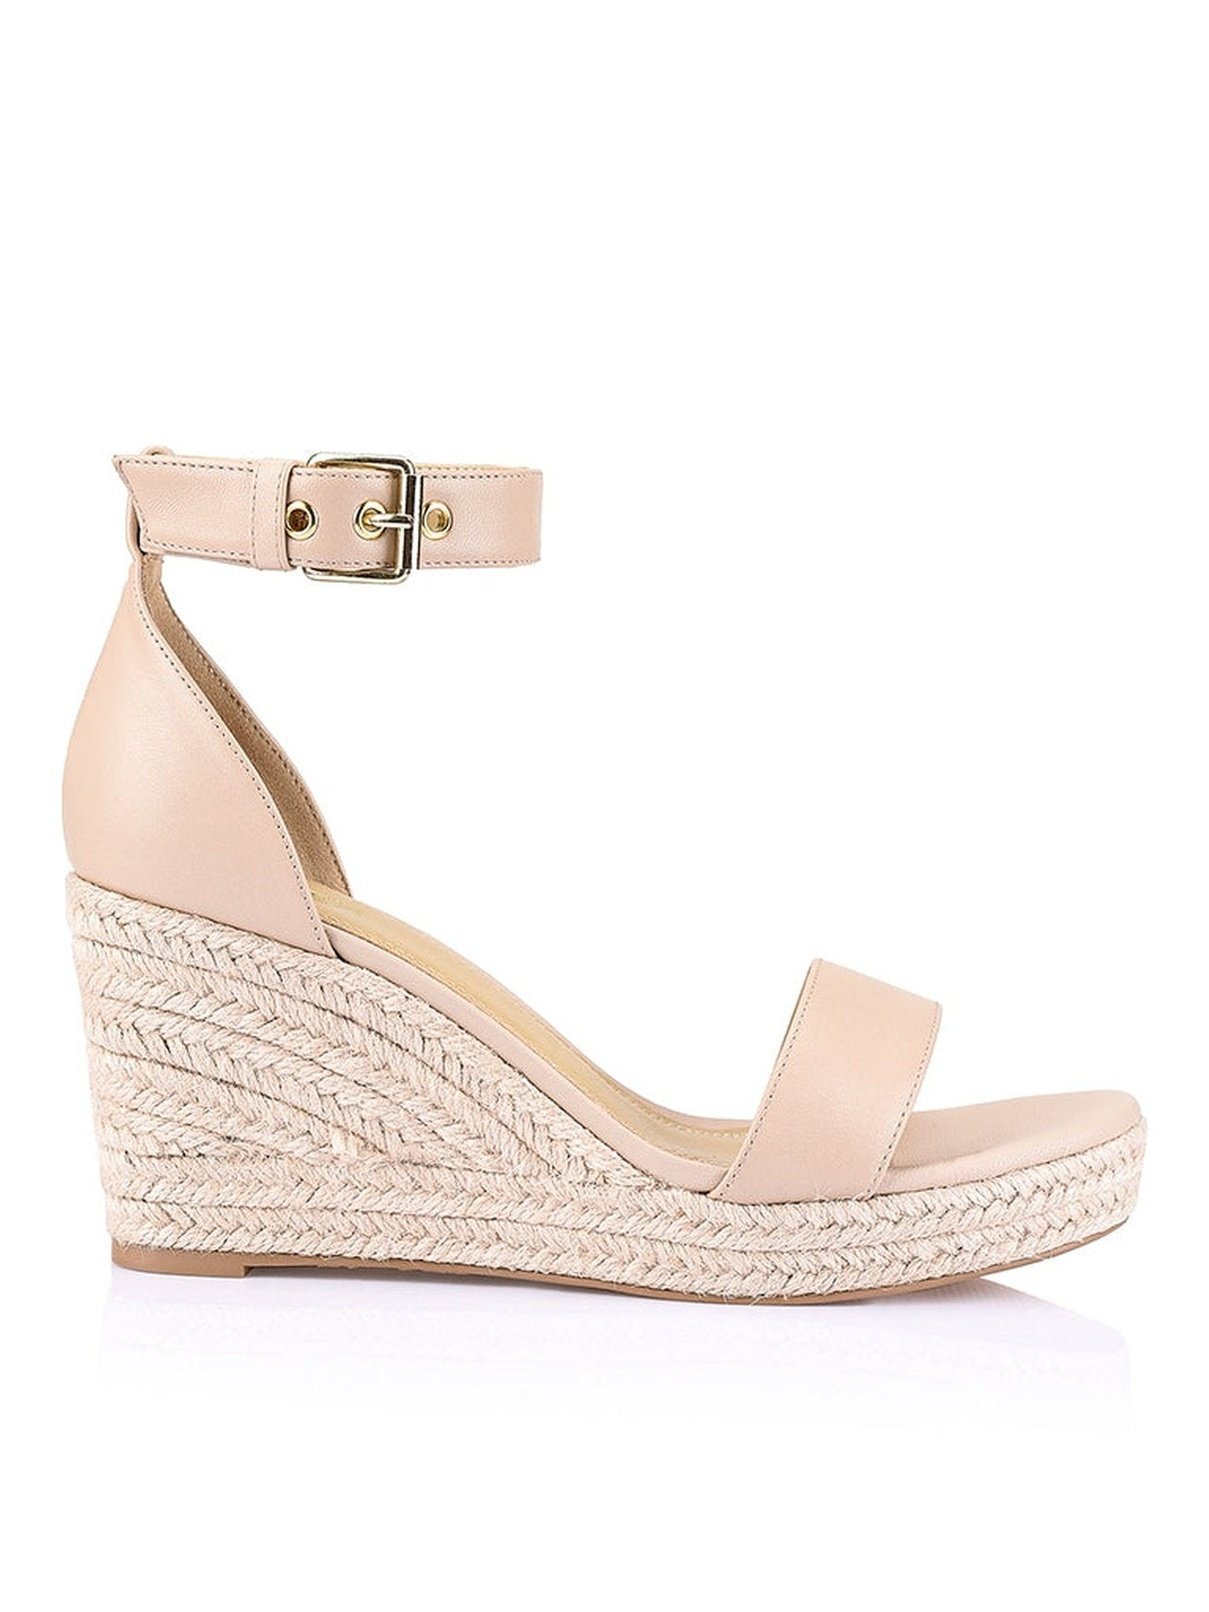 Reign II Wedge Sandals - Nude Leather